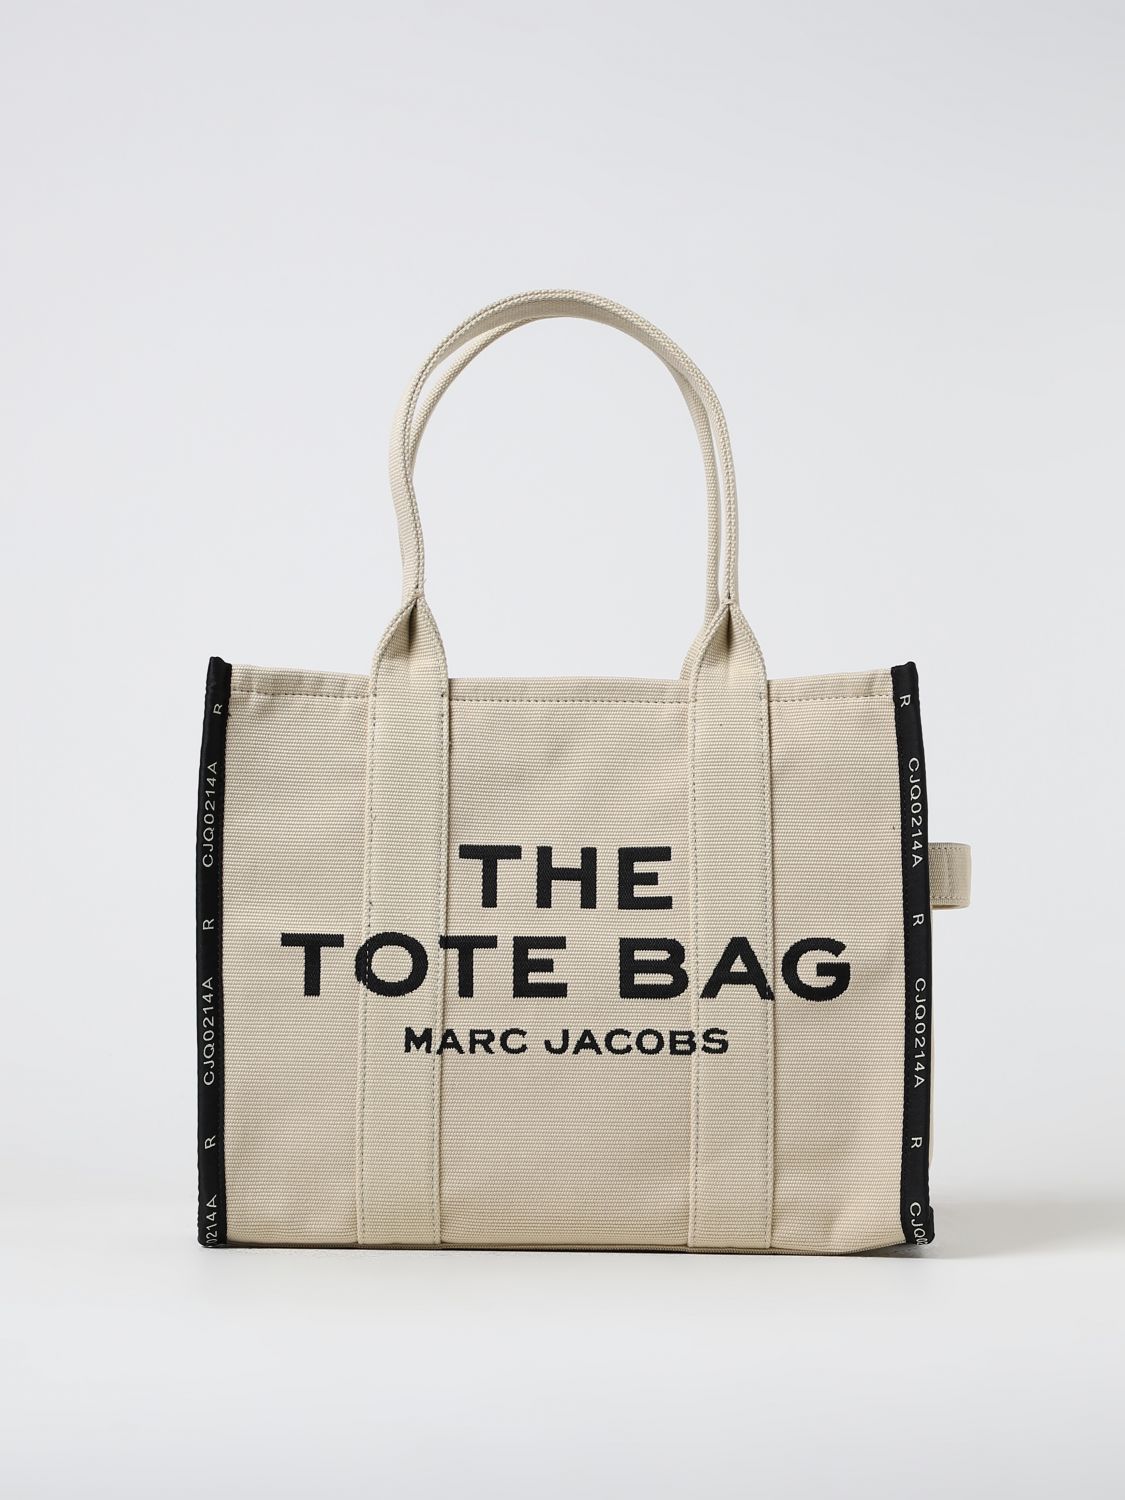 MARC JACOBS ITHE LARGE TOTE BAG N CANVAS WITH JACQUARD LOGO,F09976054